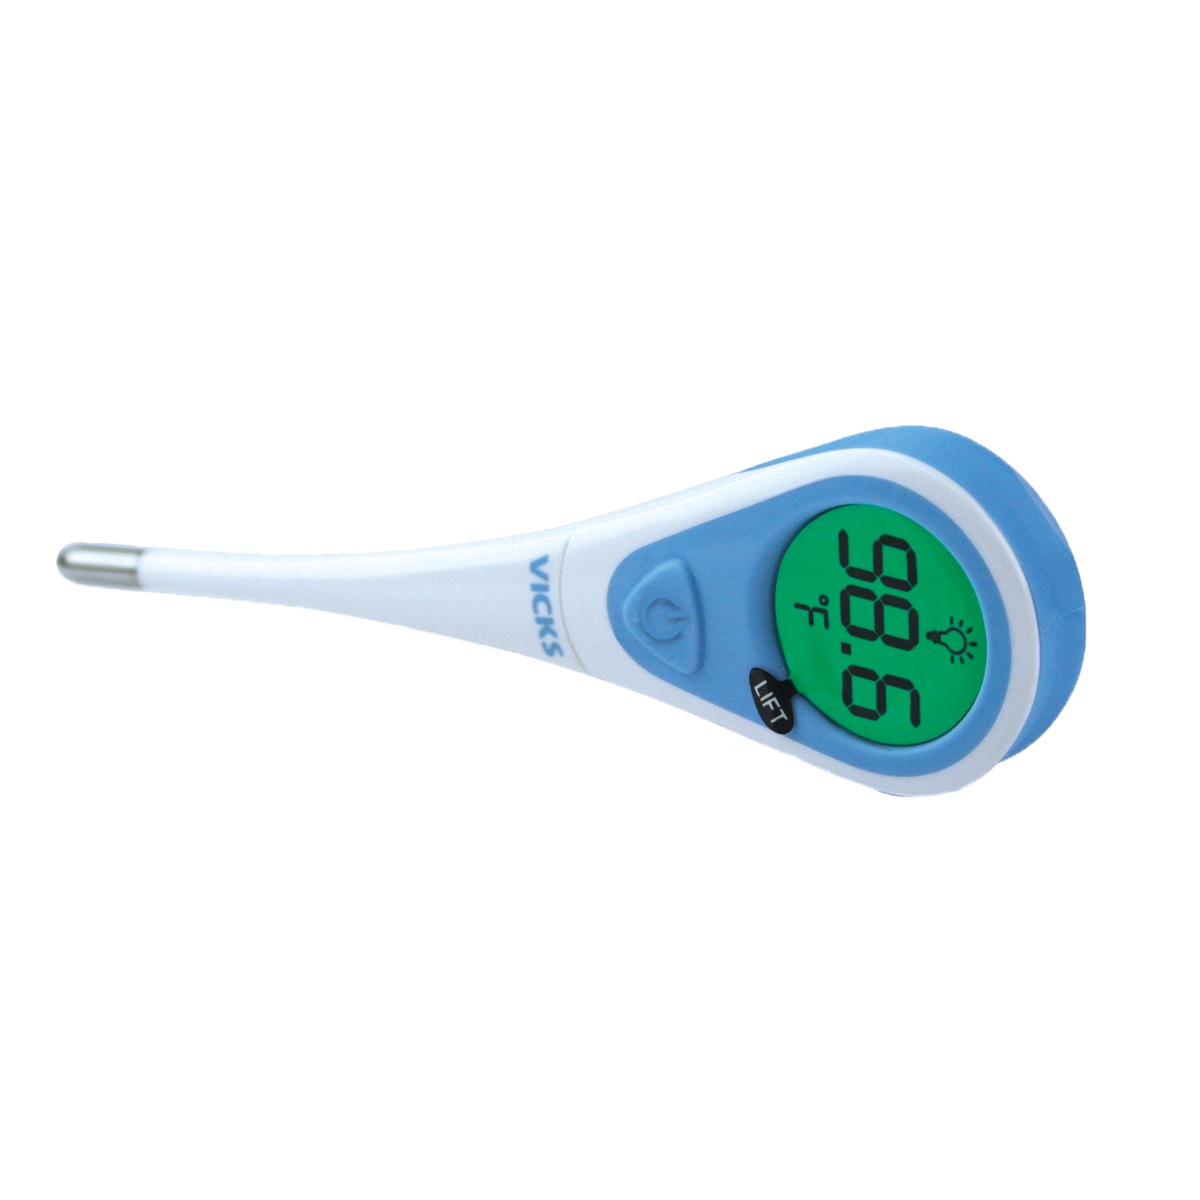  Vicks SpeedRead V912US Digital Thermometer - Packaging may vary  : Health & Household